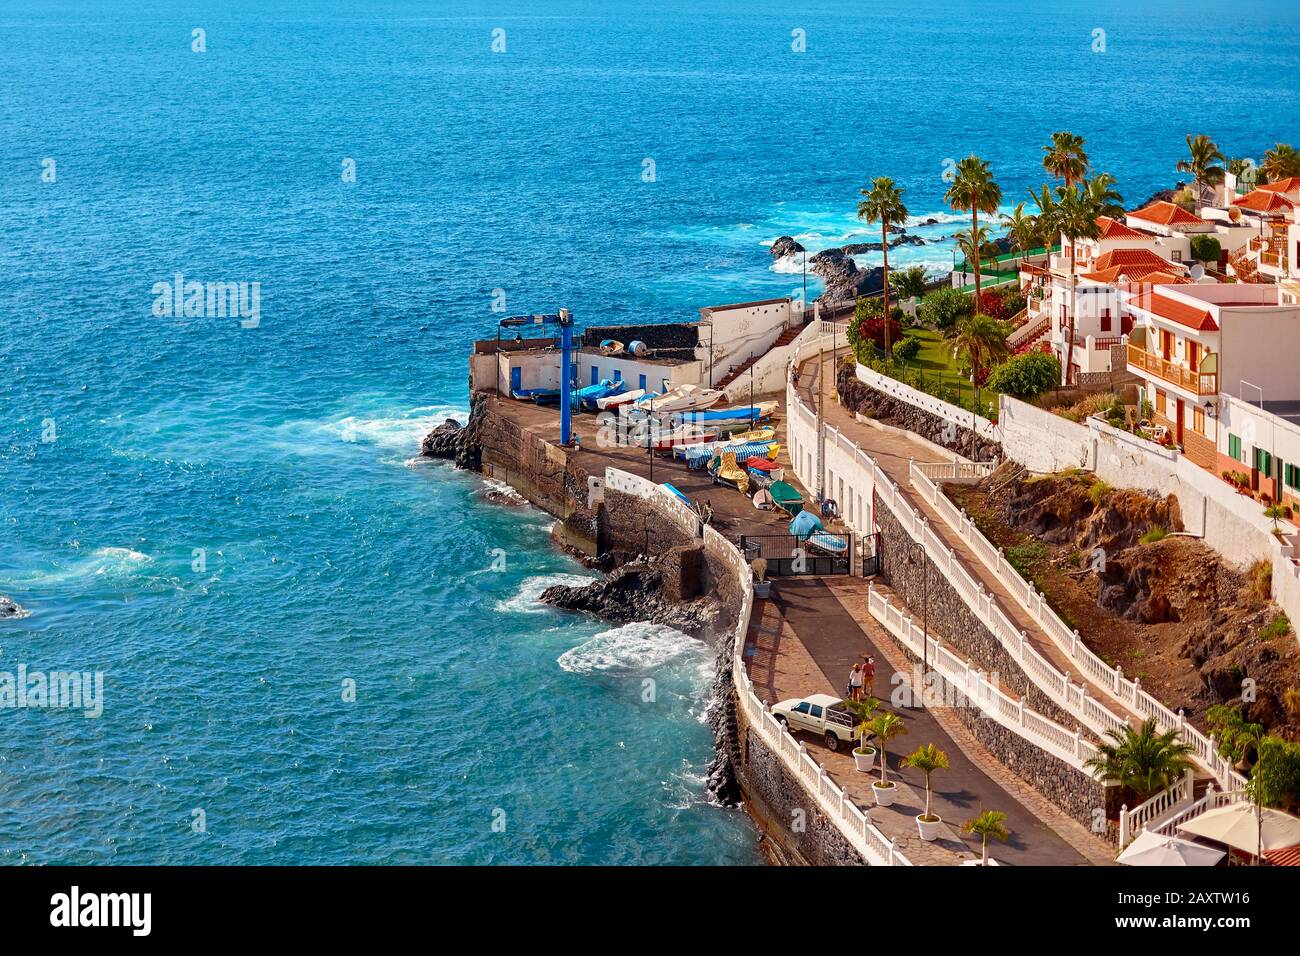 Tenerife island, aerial view of a small town, village with colorful buildings on a summer day. Seaside resort. Stock Photo